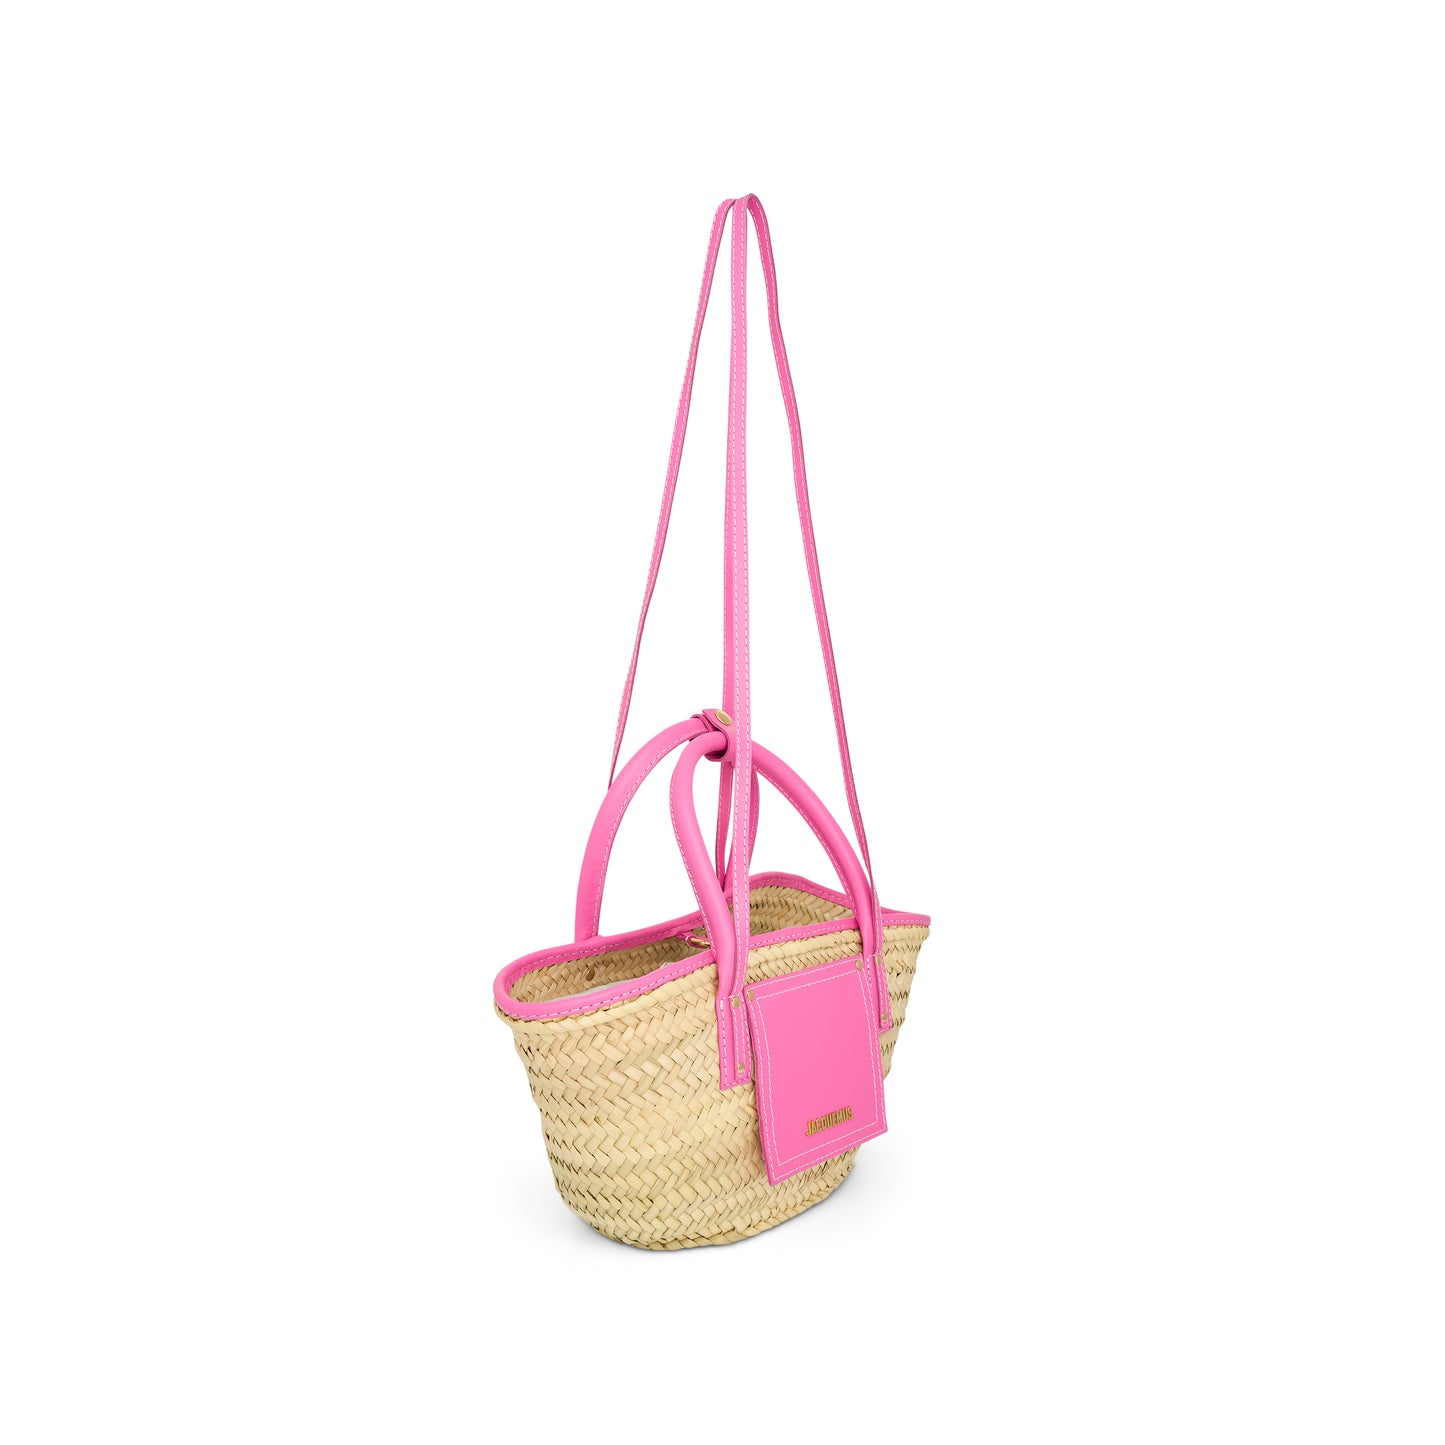 Le Petit Panier Soli Straw & Leather Bag in Neon Pink